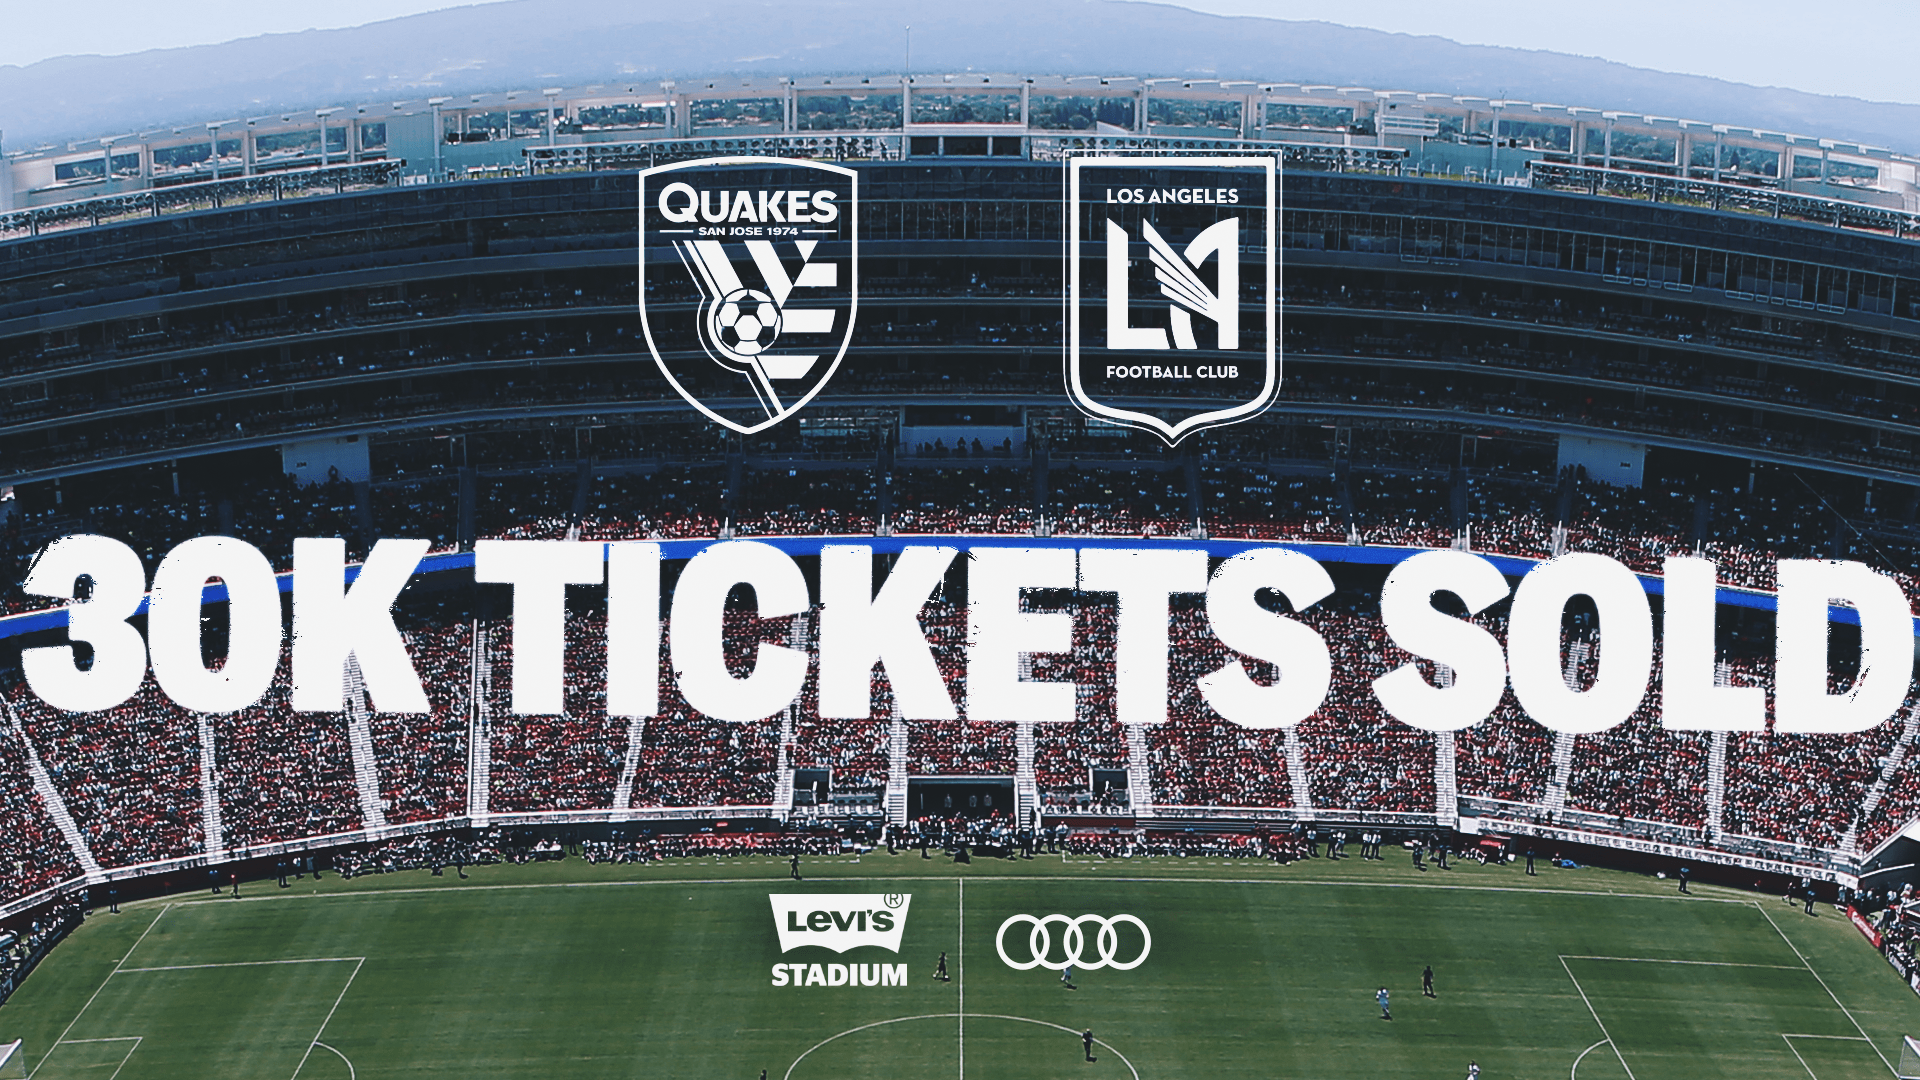 NEWS: Earthquakes Surpass 30,000 Tickets Sold for Showdown with LAFC at  Levi's Stadium